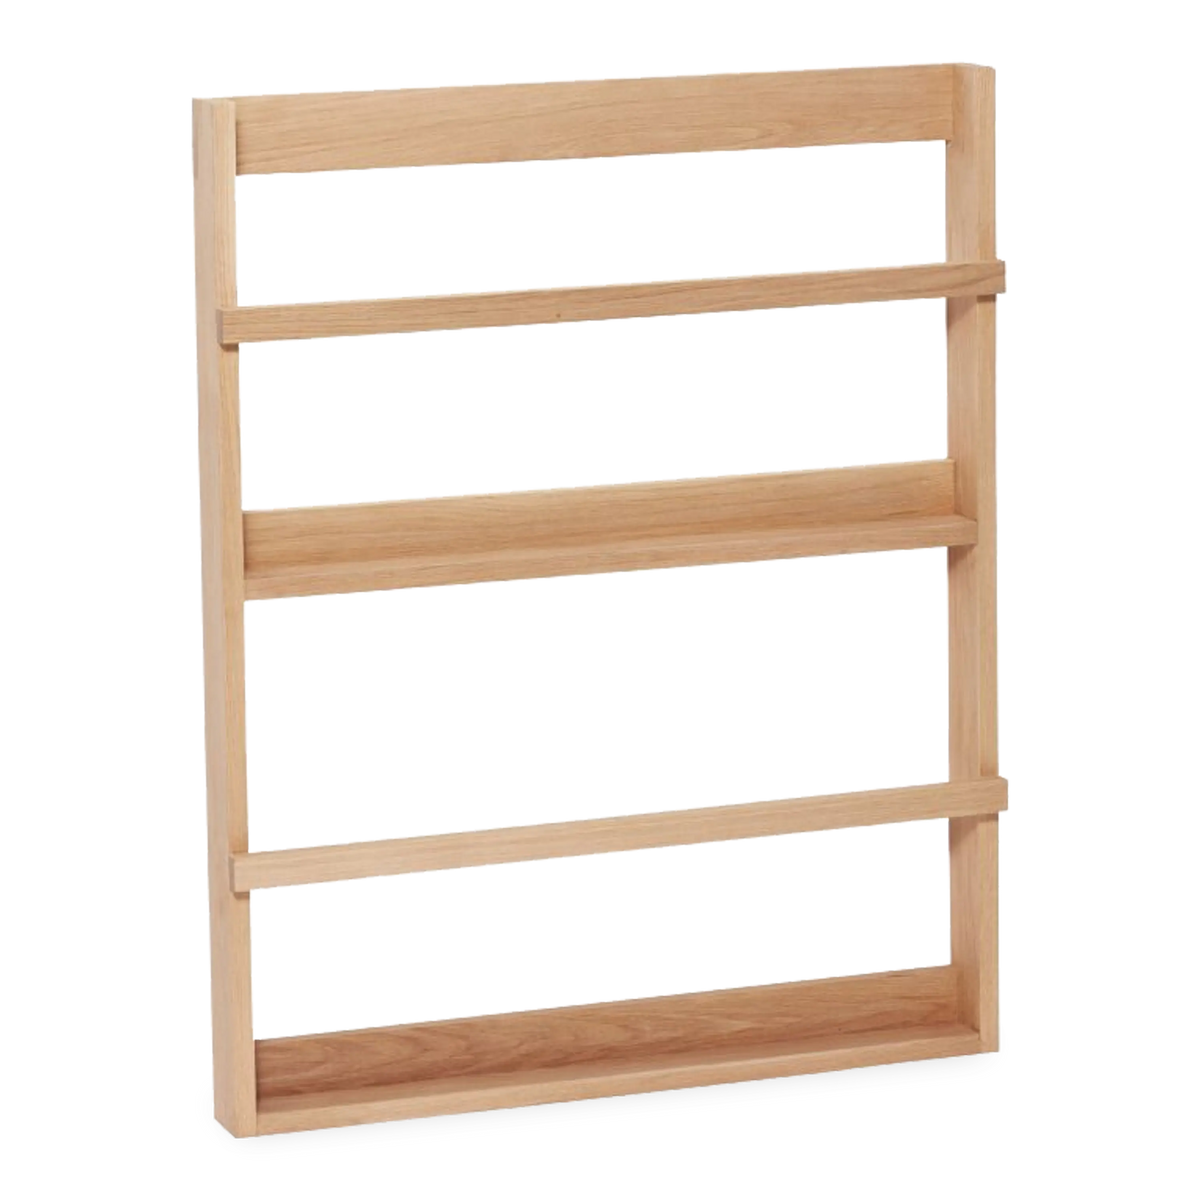 Taking design elements from minimalistic design, the Oak Display Shelf proudly displays its natural grain and its warm pleasant tone.